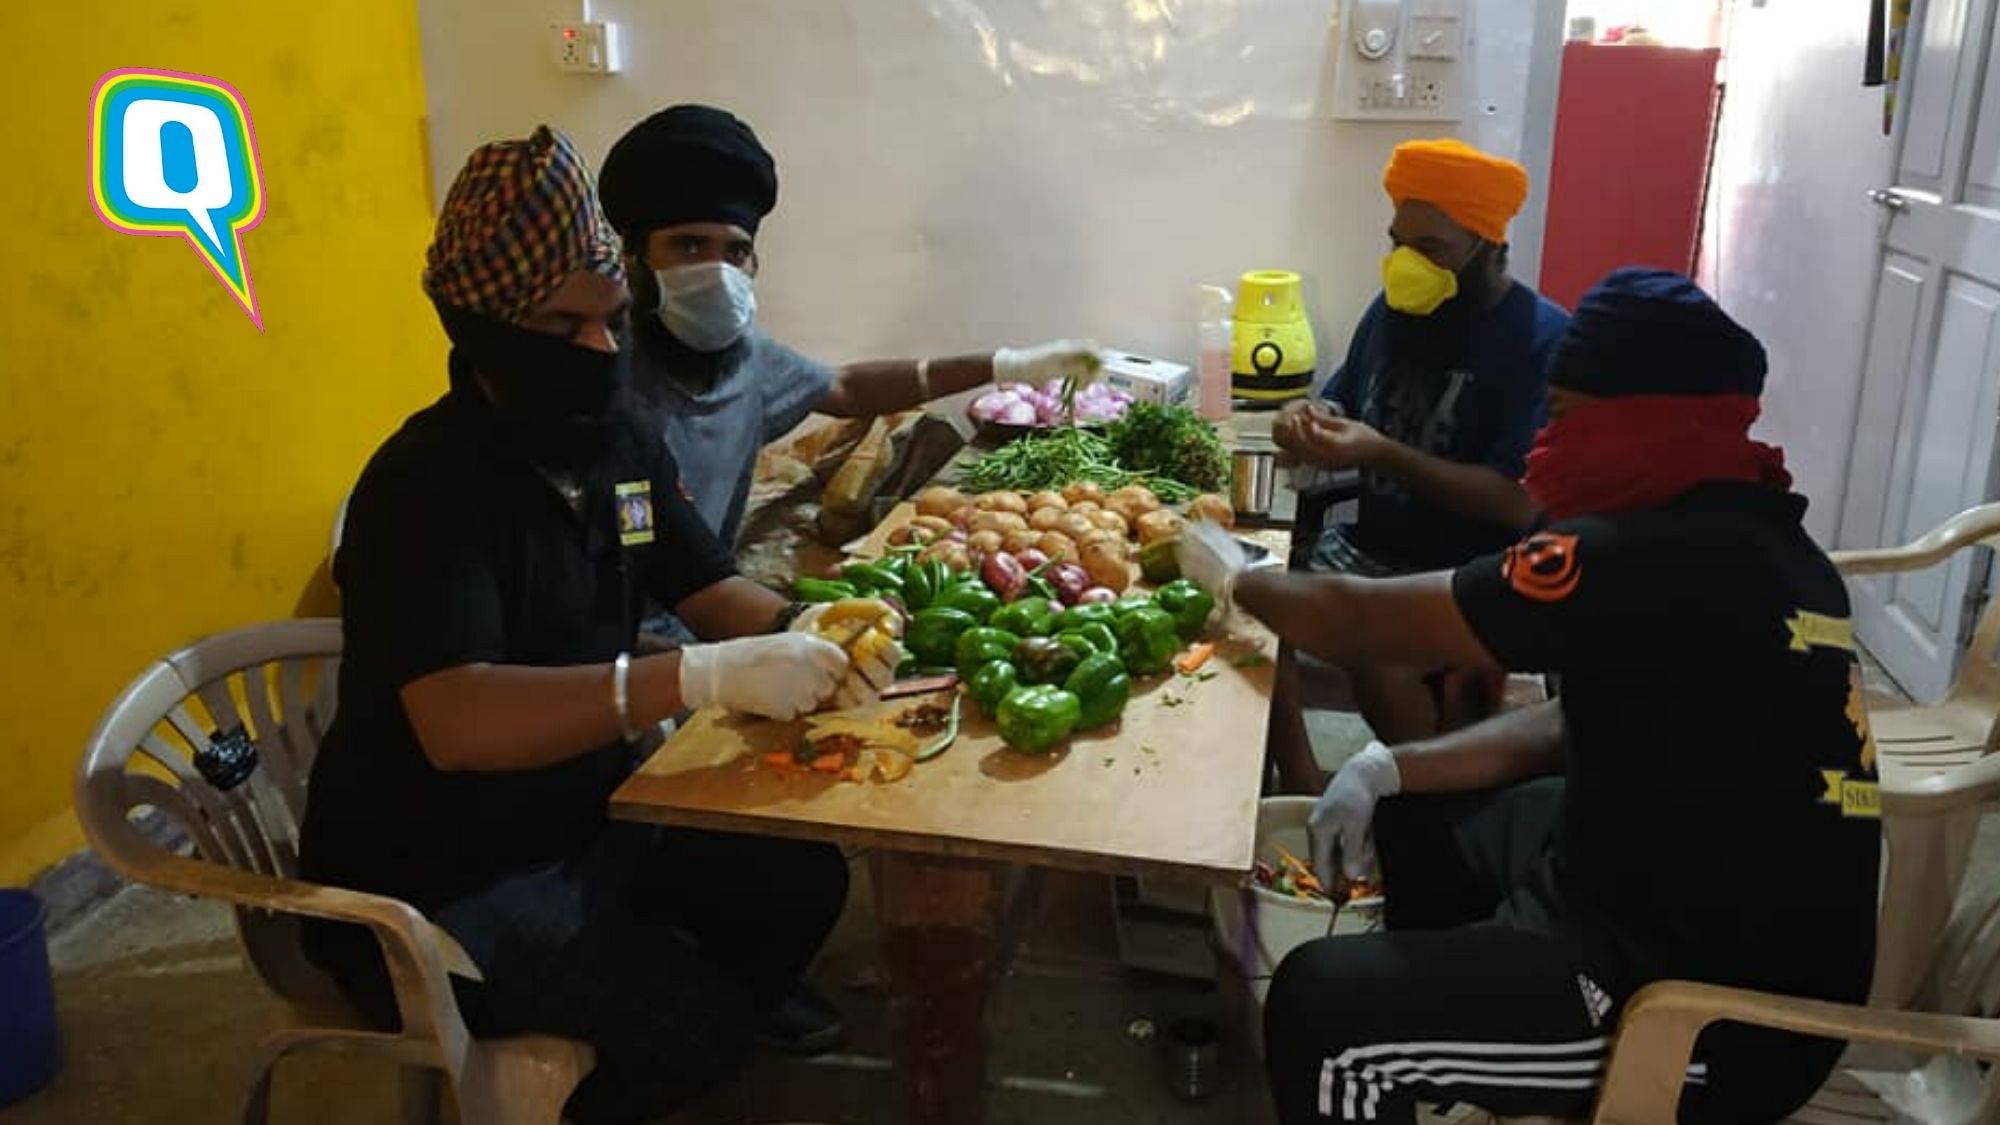 Goa Sikh Youth community prepares food for those affected by the lockdown.